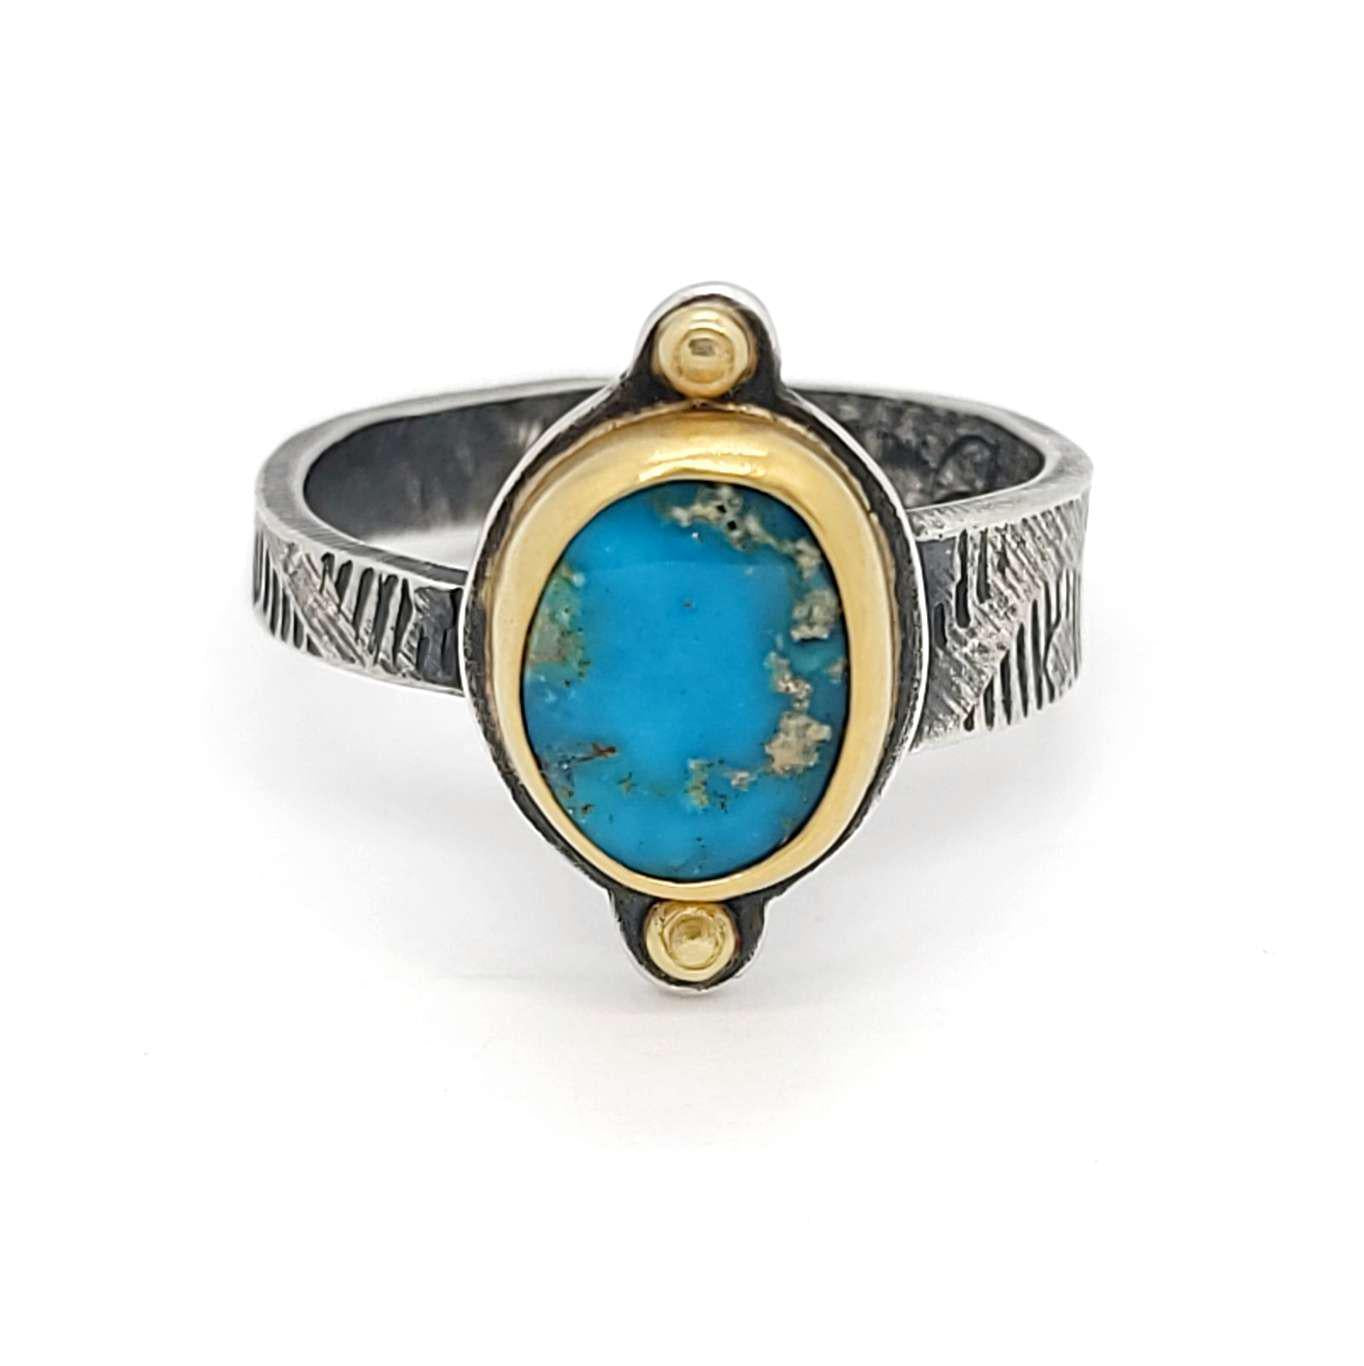 Ring - Size 7.75 - Sonoran Gold Turquoise in 22k Yellow Gold and Sterling Silver by Allison Kallaway